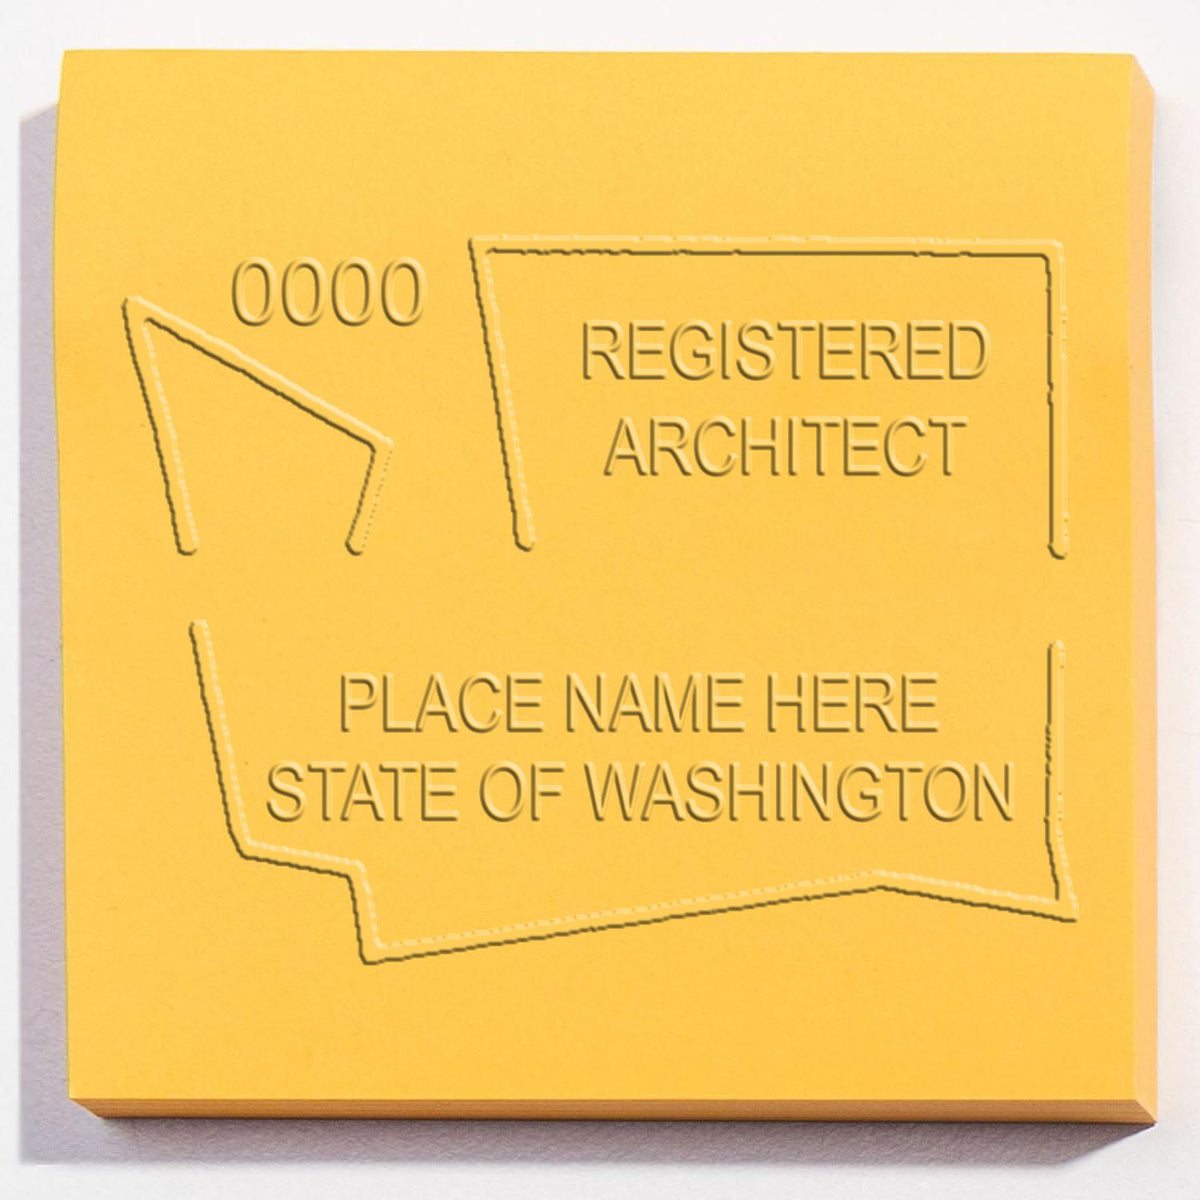 An alternative view of the State of Washington Long Reach Architectural Embossing Seal stamped on a sheet of paper showing the image in use